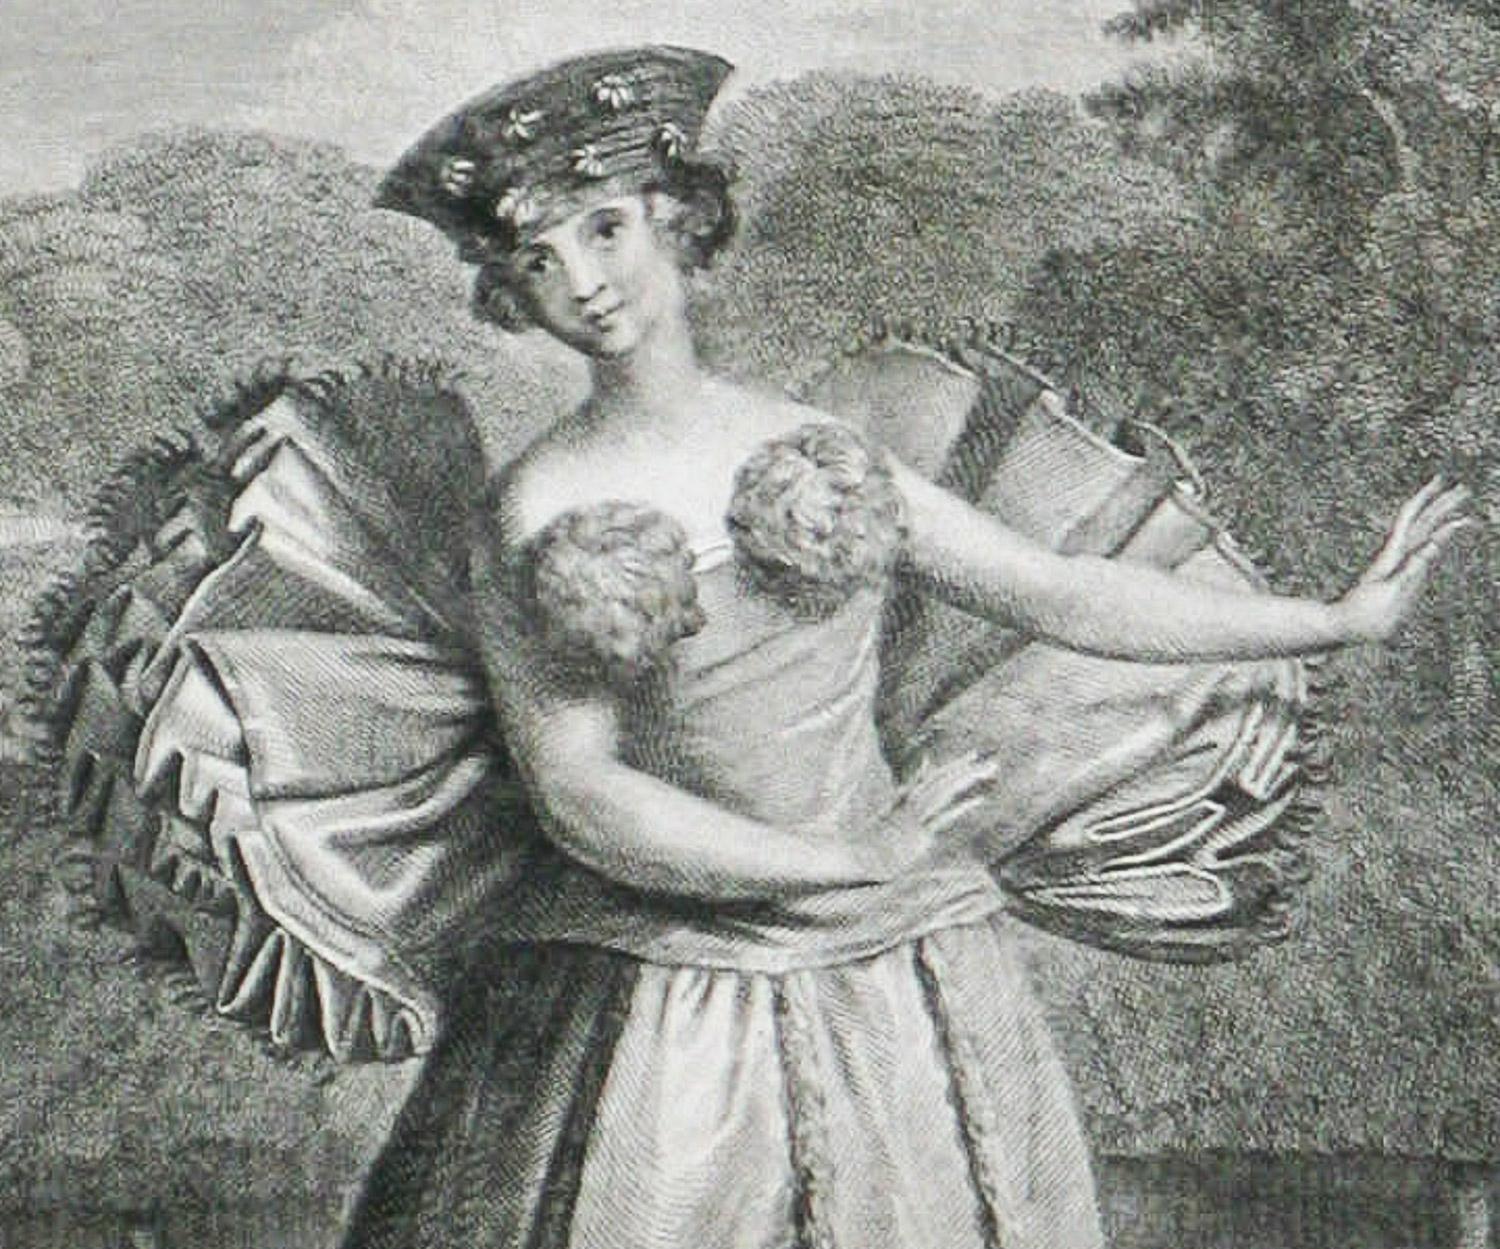 A Young Woman of Otaheite, Dancing (Tahiti) 1784 Captain Cooks Voyage by Webber - Print by John Webber